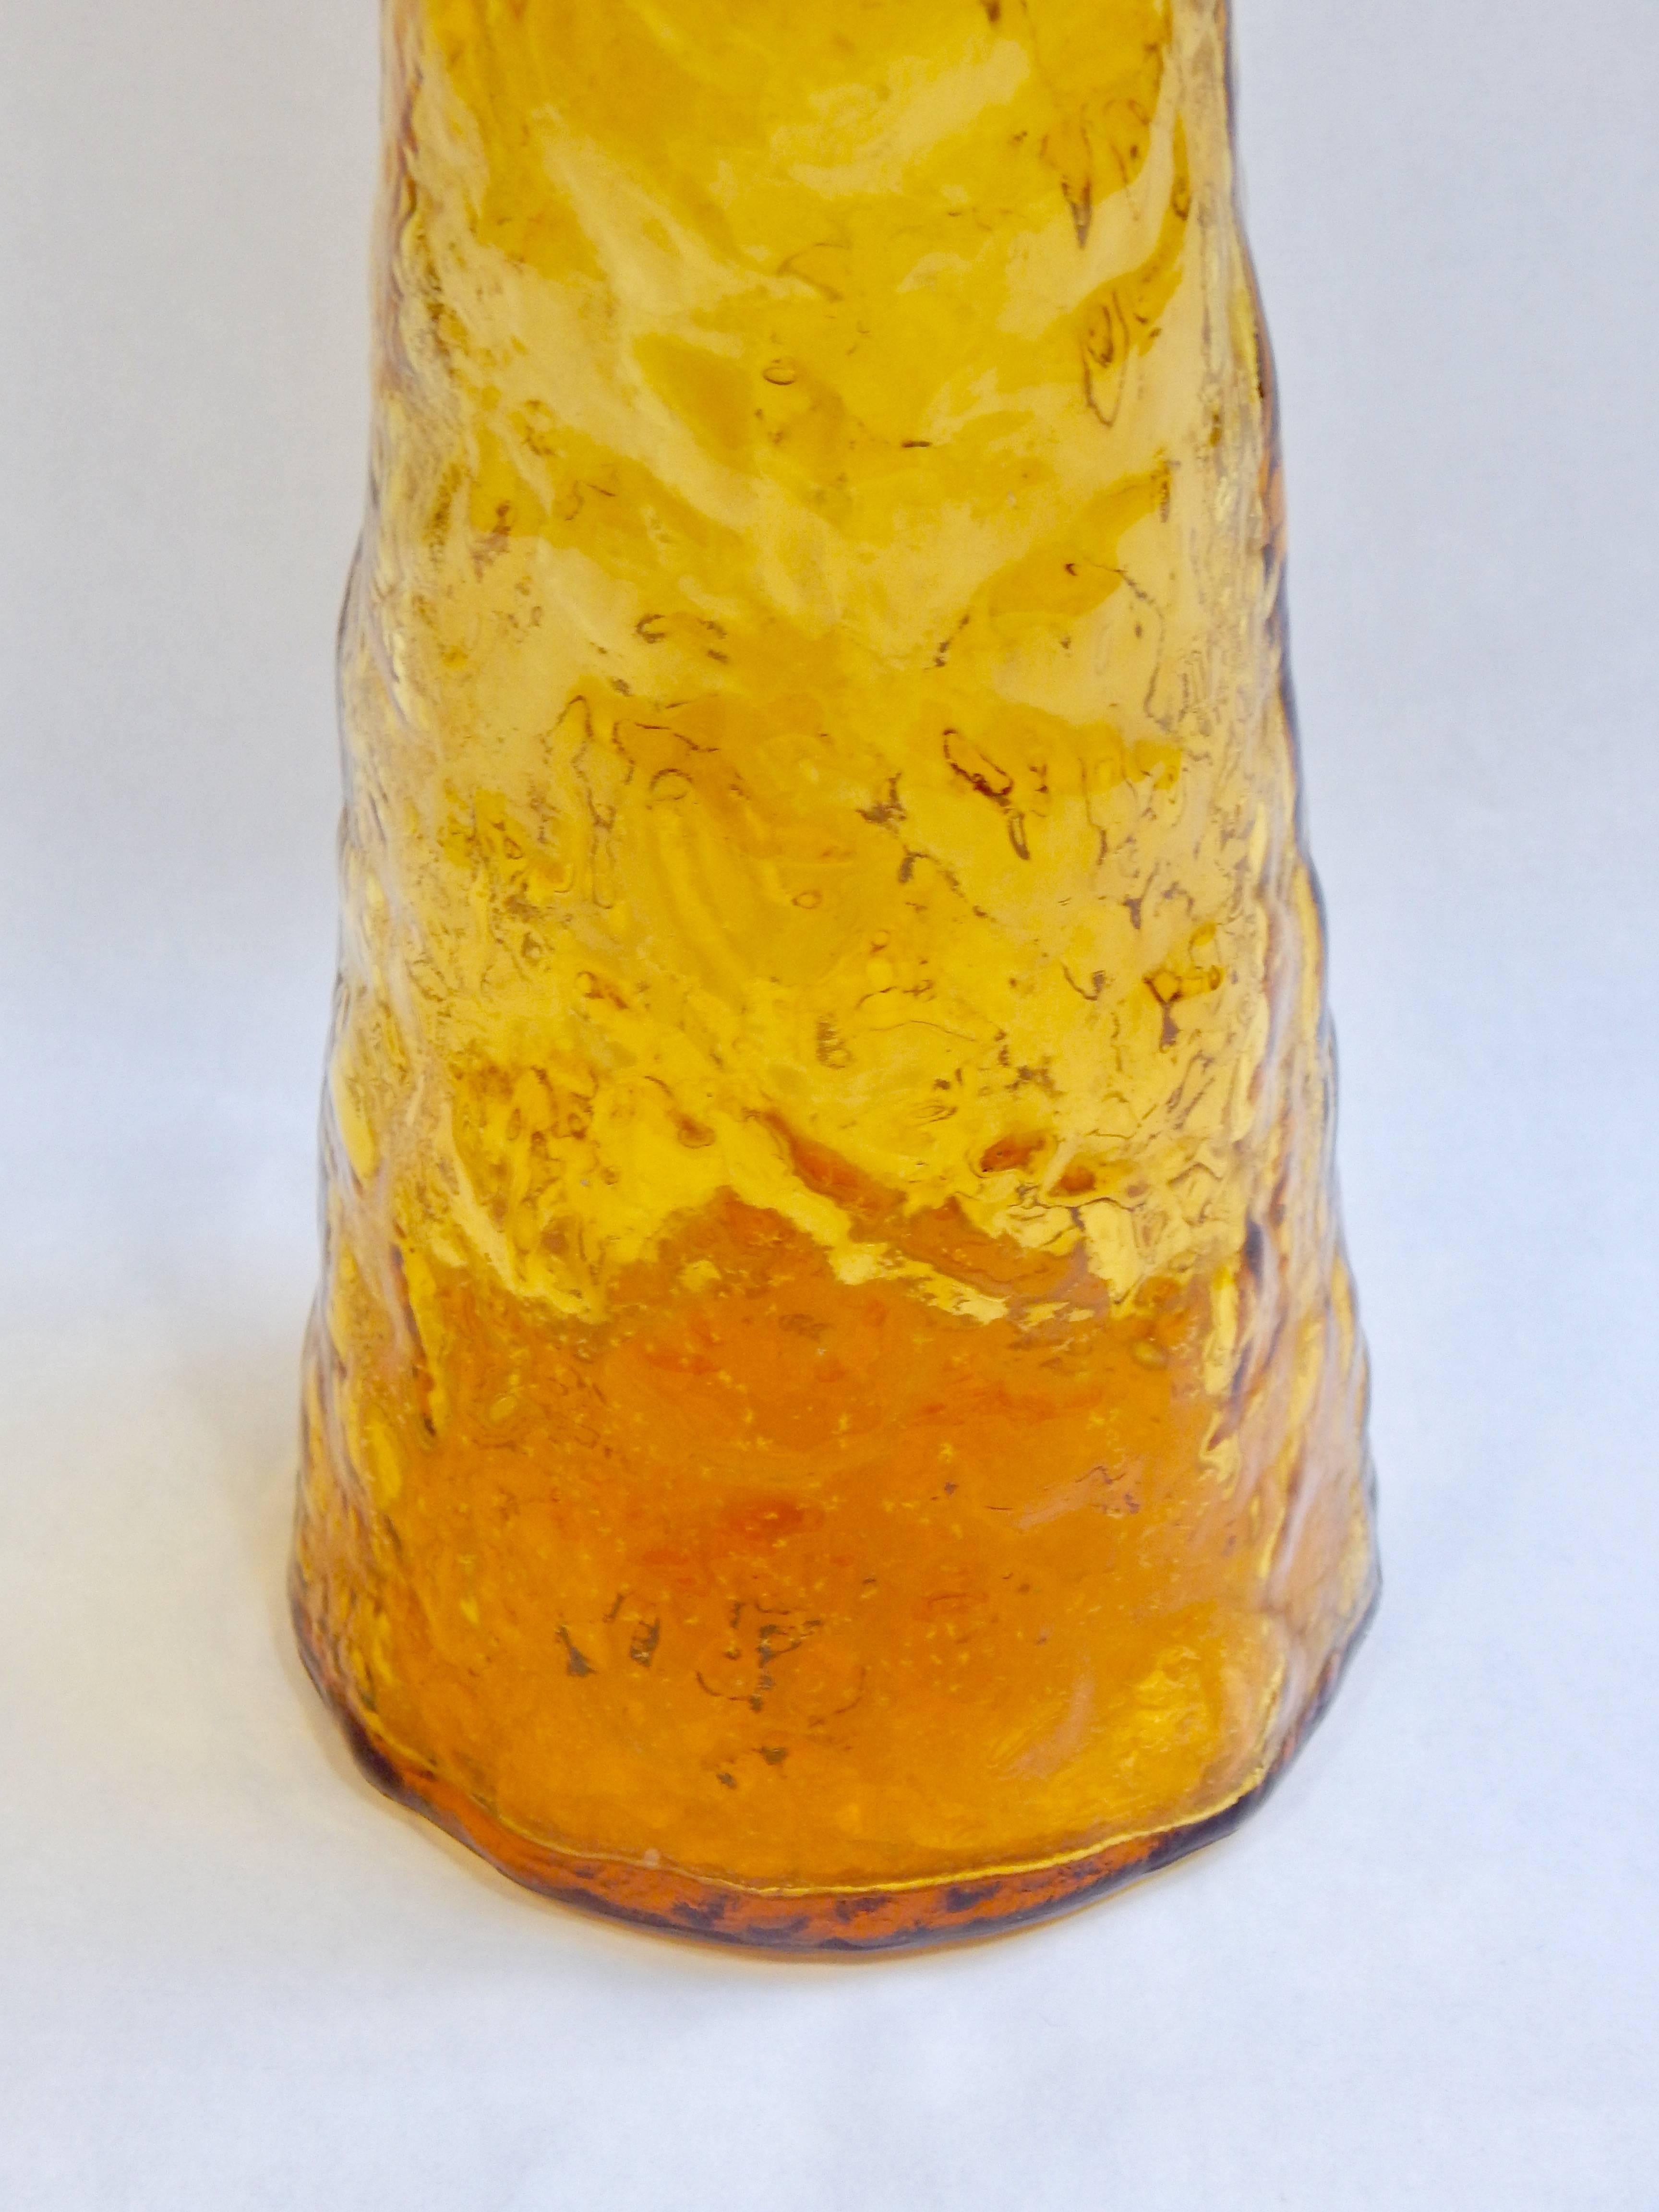 1960s Italian Tall glass bottle or decanter. Still retains original made in Italy marking sticker. Excellent condition.